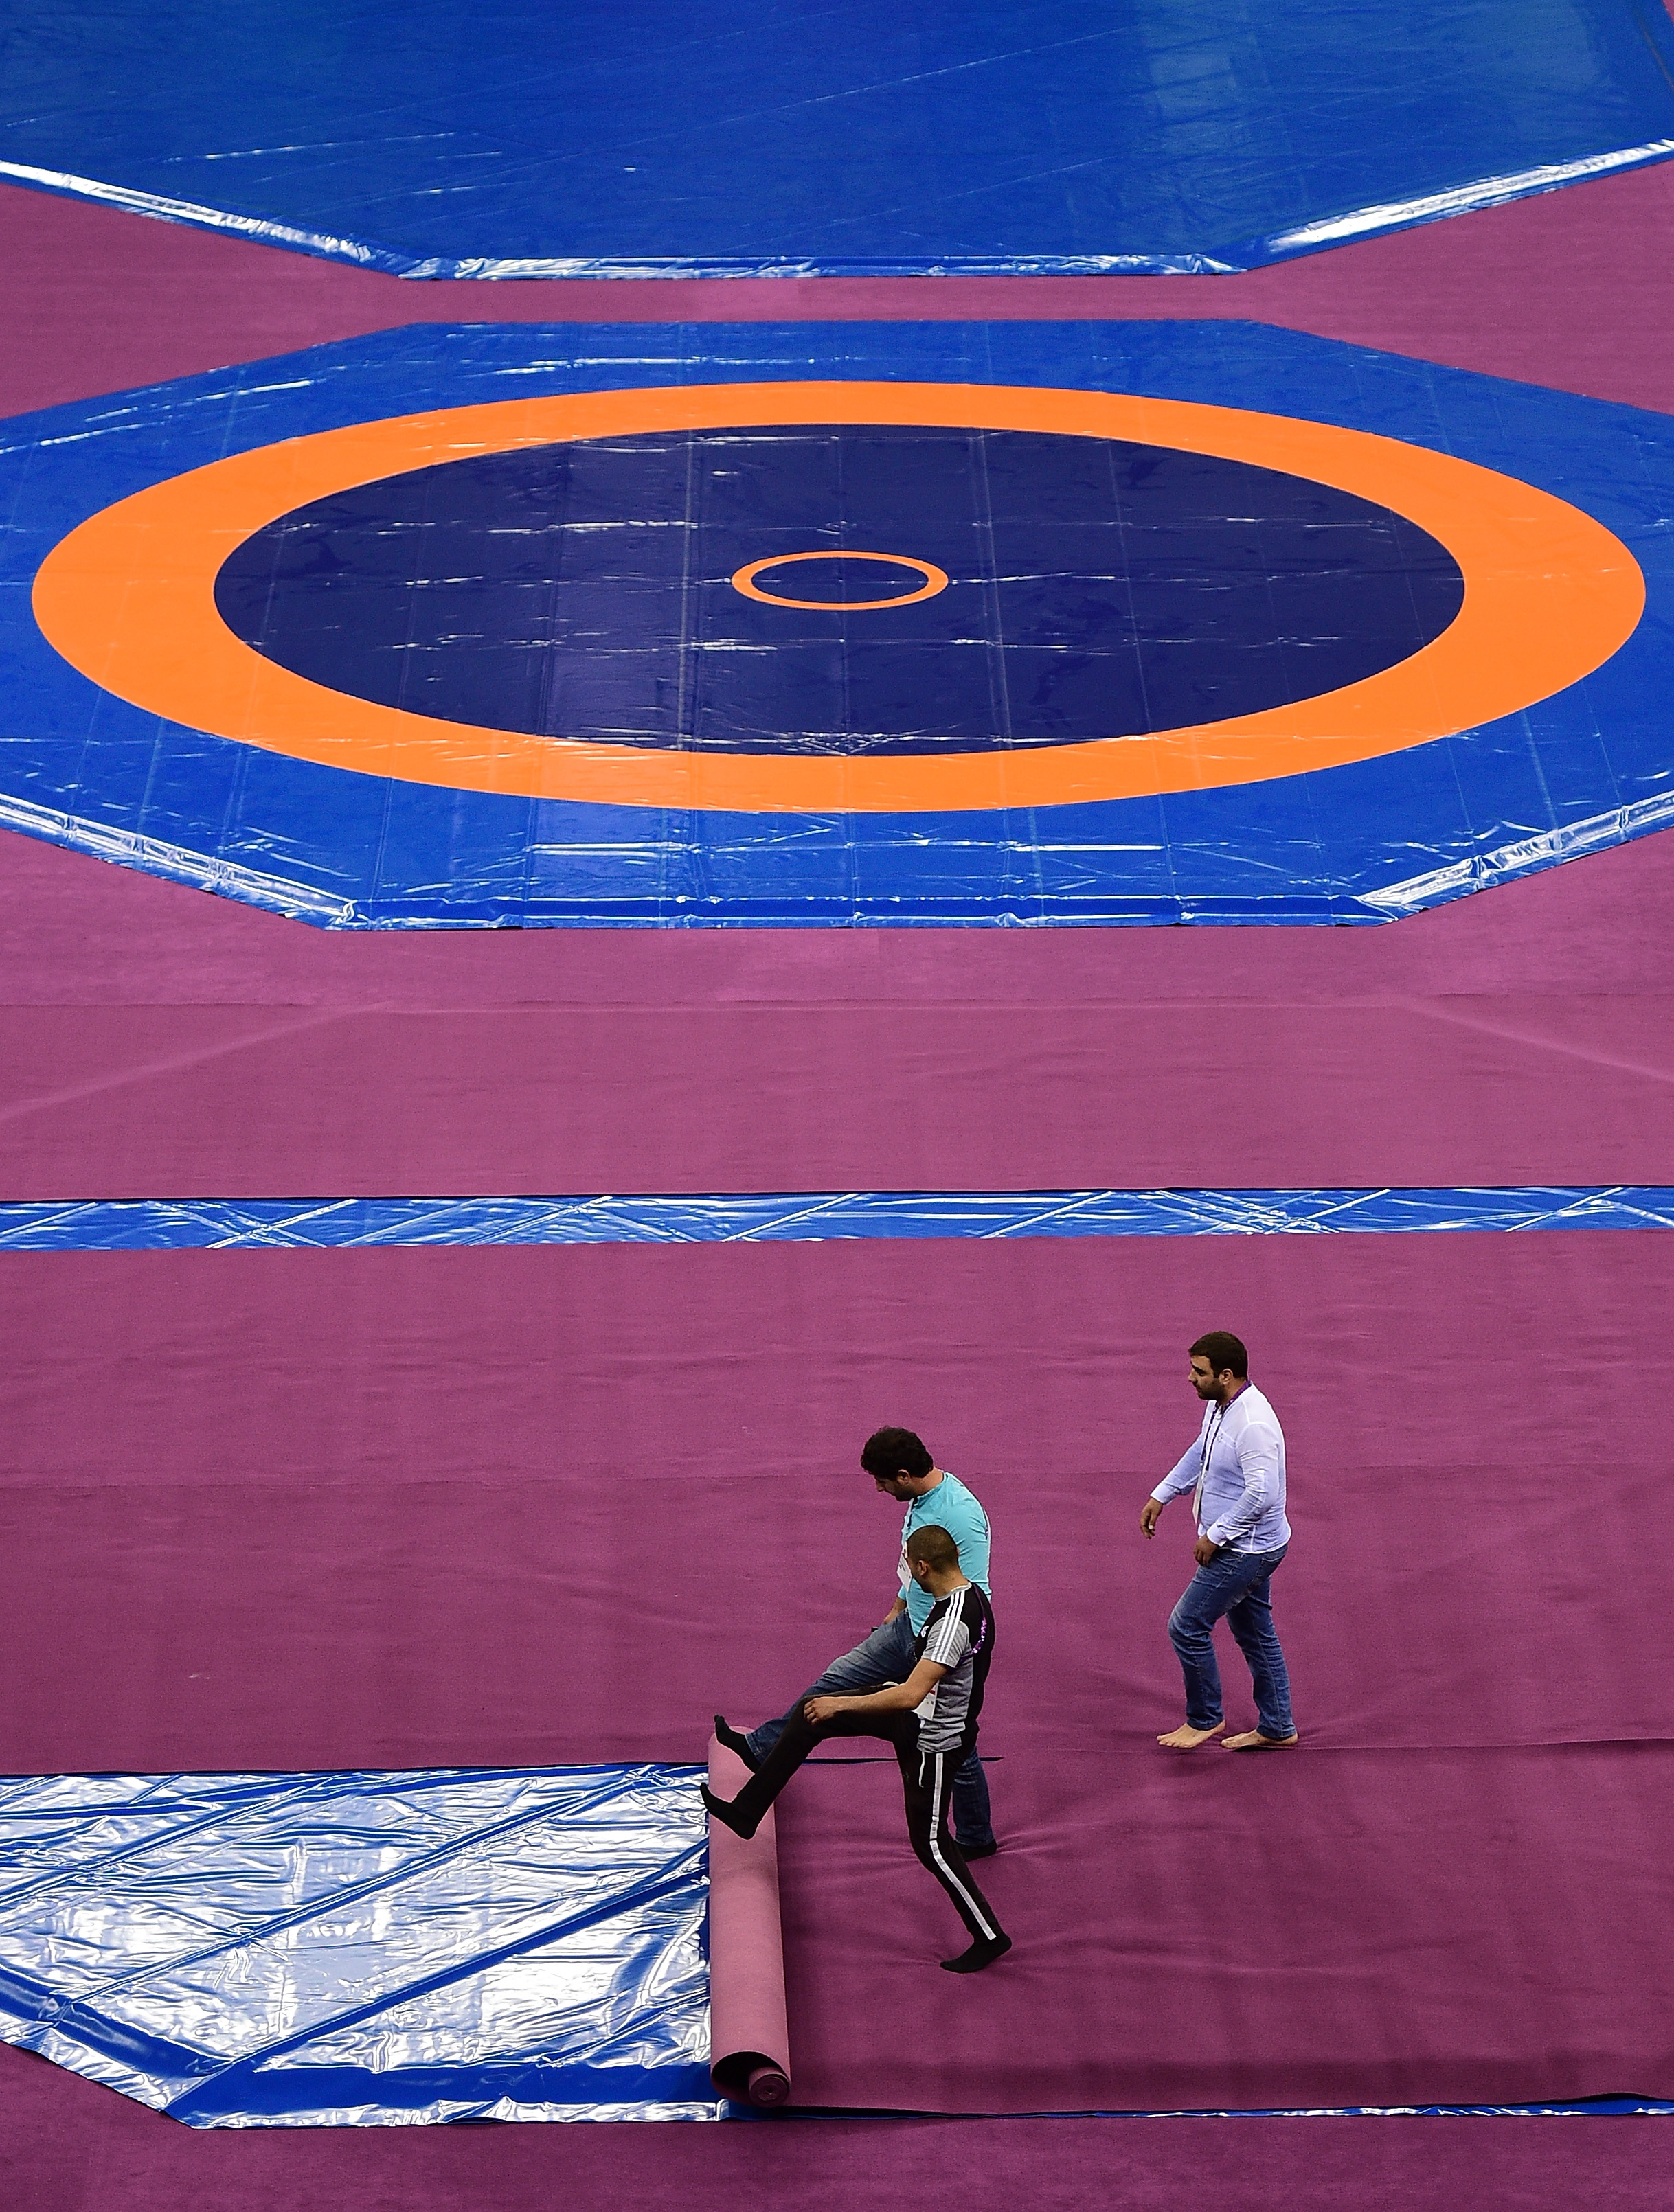 Wrestling Federation of India invites multiple applications ahead of its preparations for 2020 Olympics